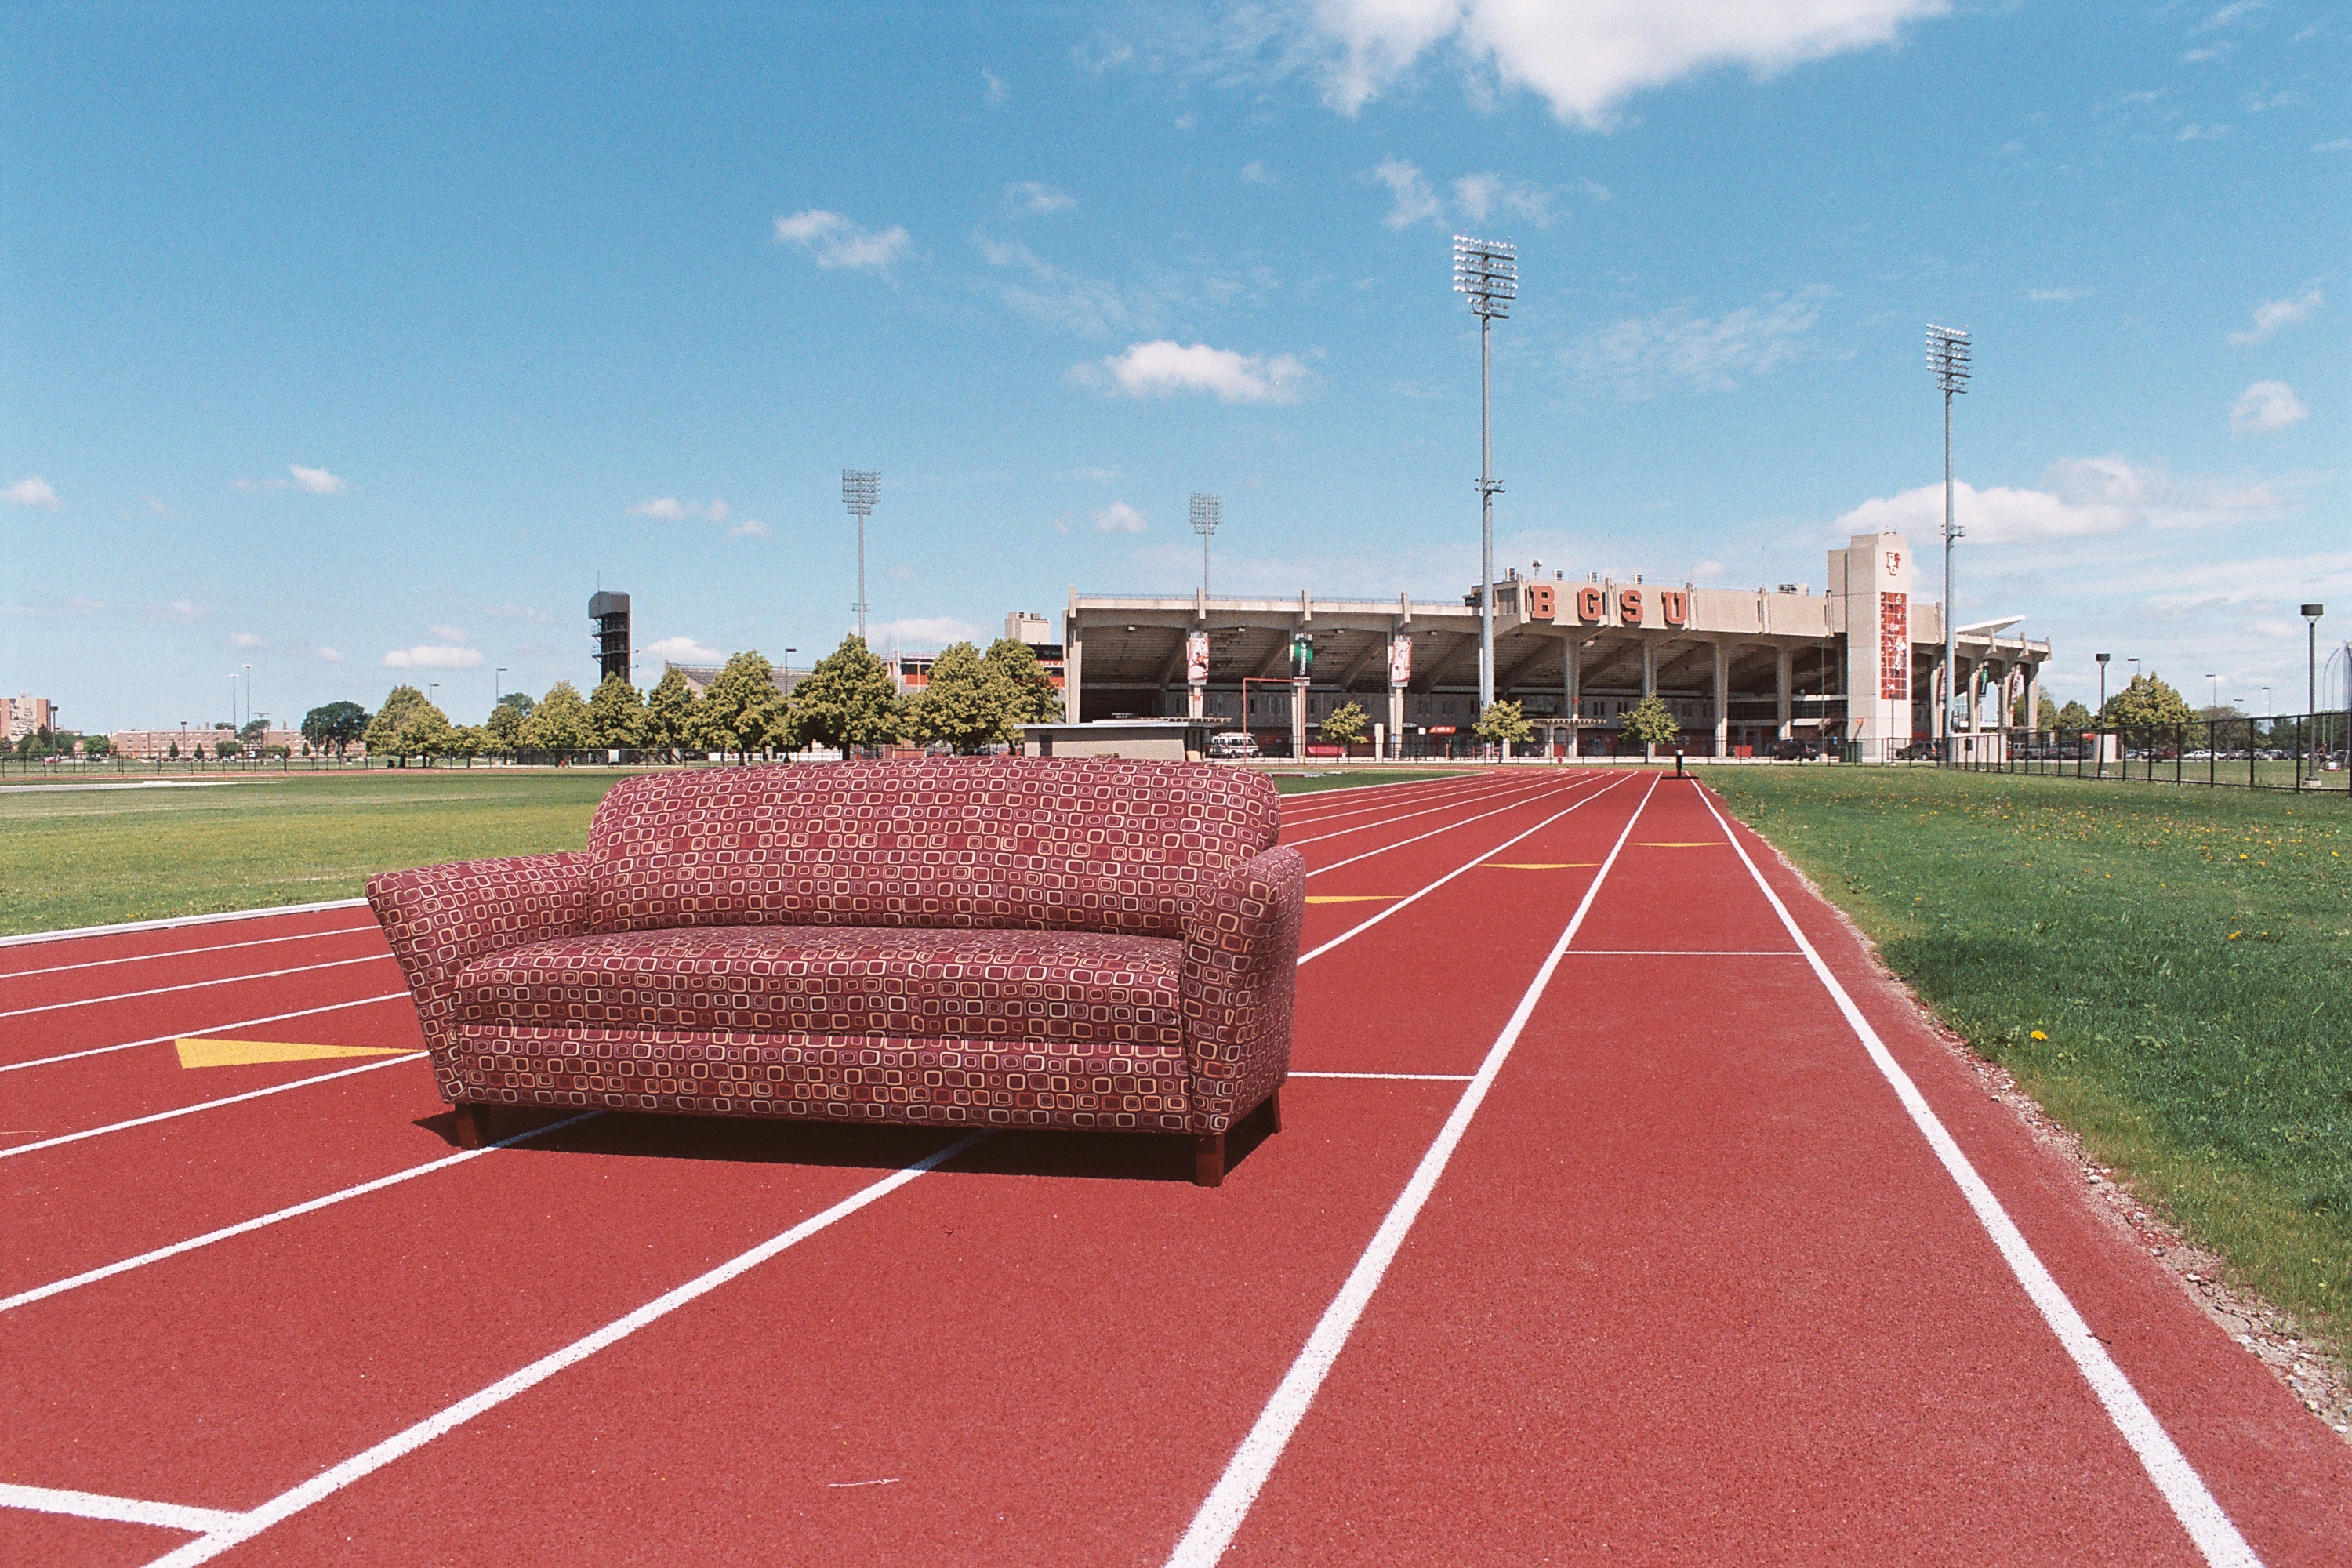 counseling center couch on track field